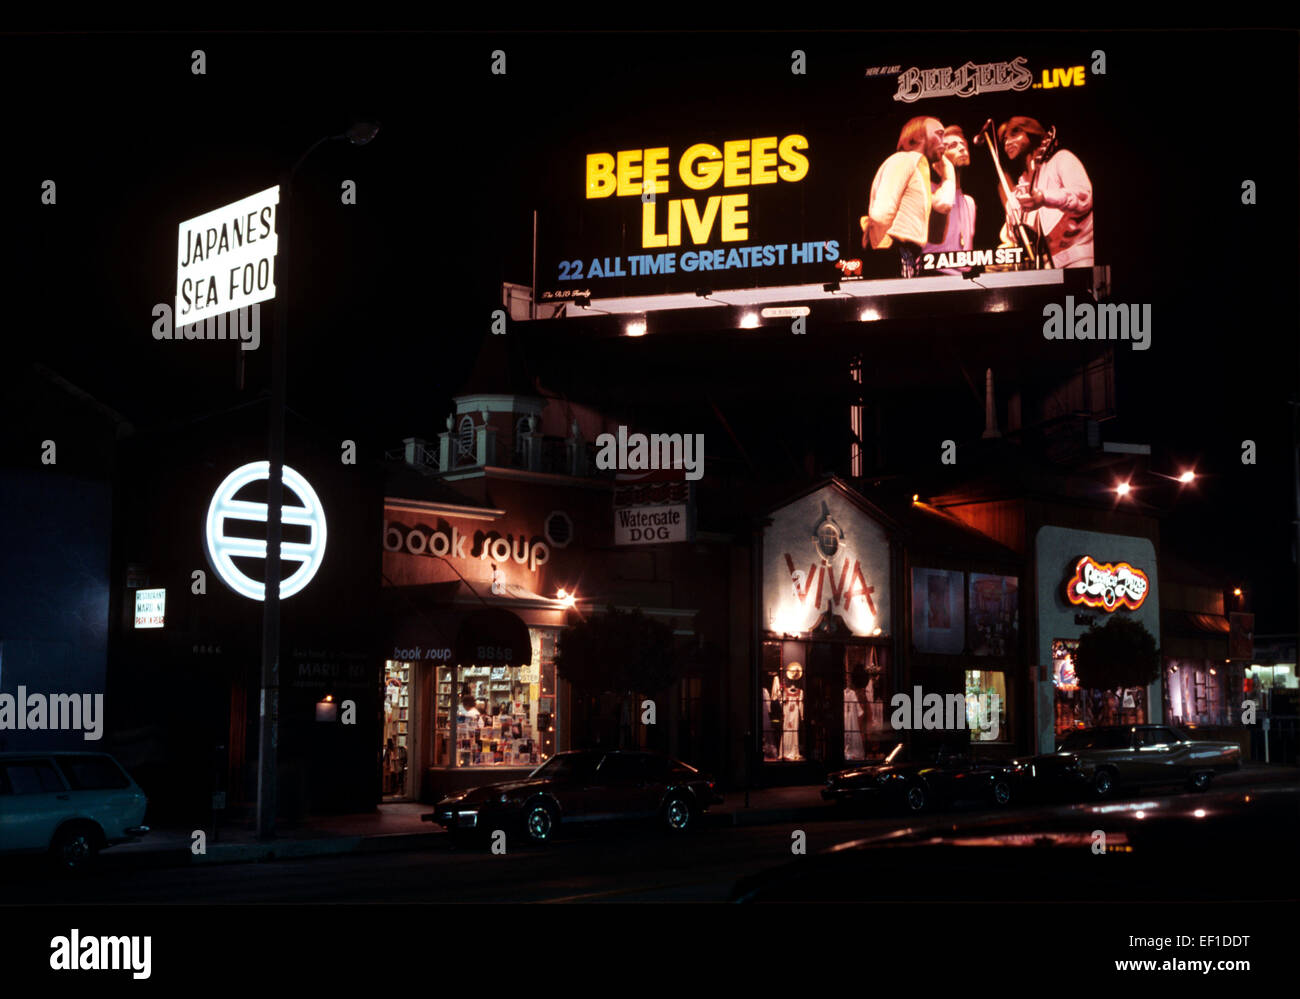 Bee Gees billboard on the Sunset Strip in Los Angeles, CA Stock Photo